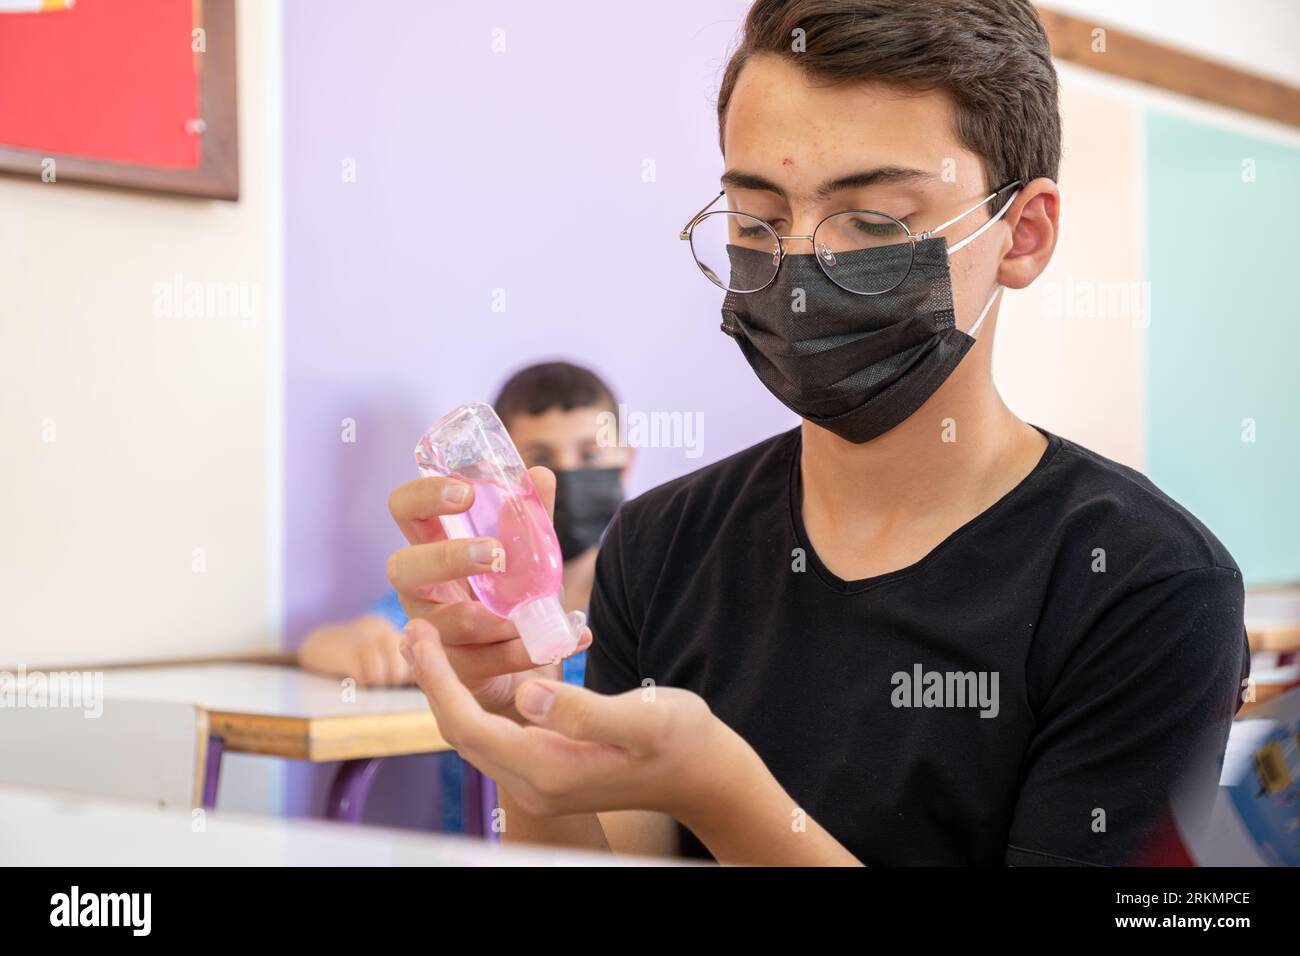 Teenager in school sterilizing his hands while wearing face mask to prevent infection Stock Photo